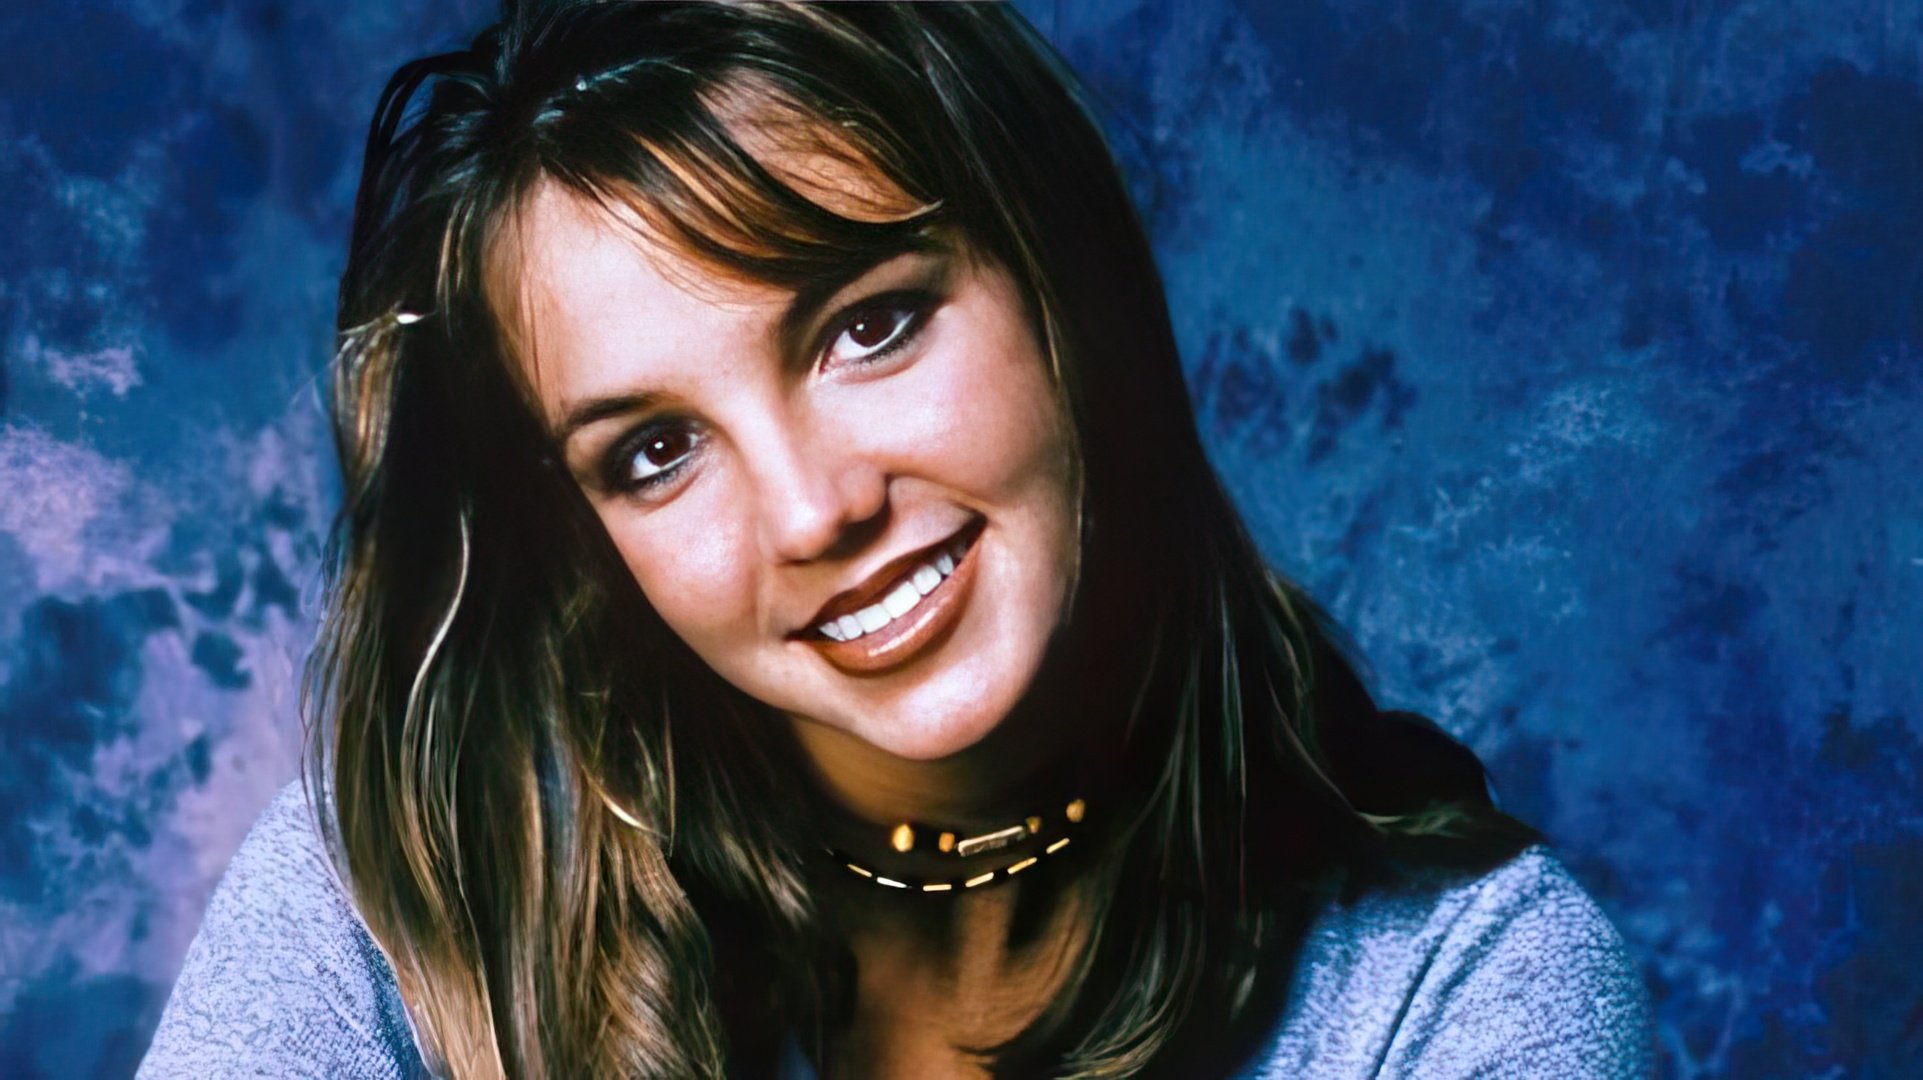 Britney Spears, teen idol of the late 90s